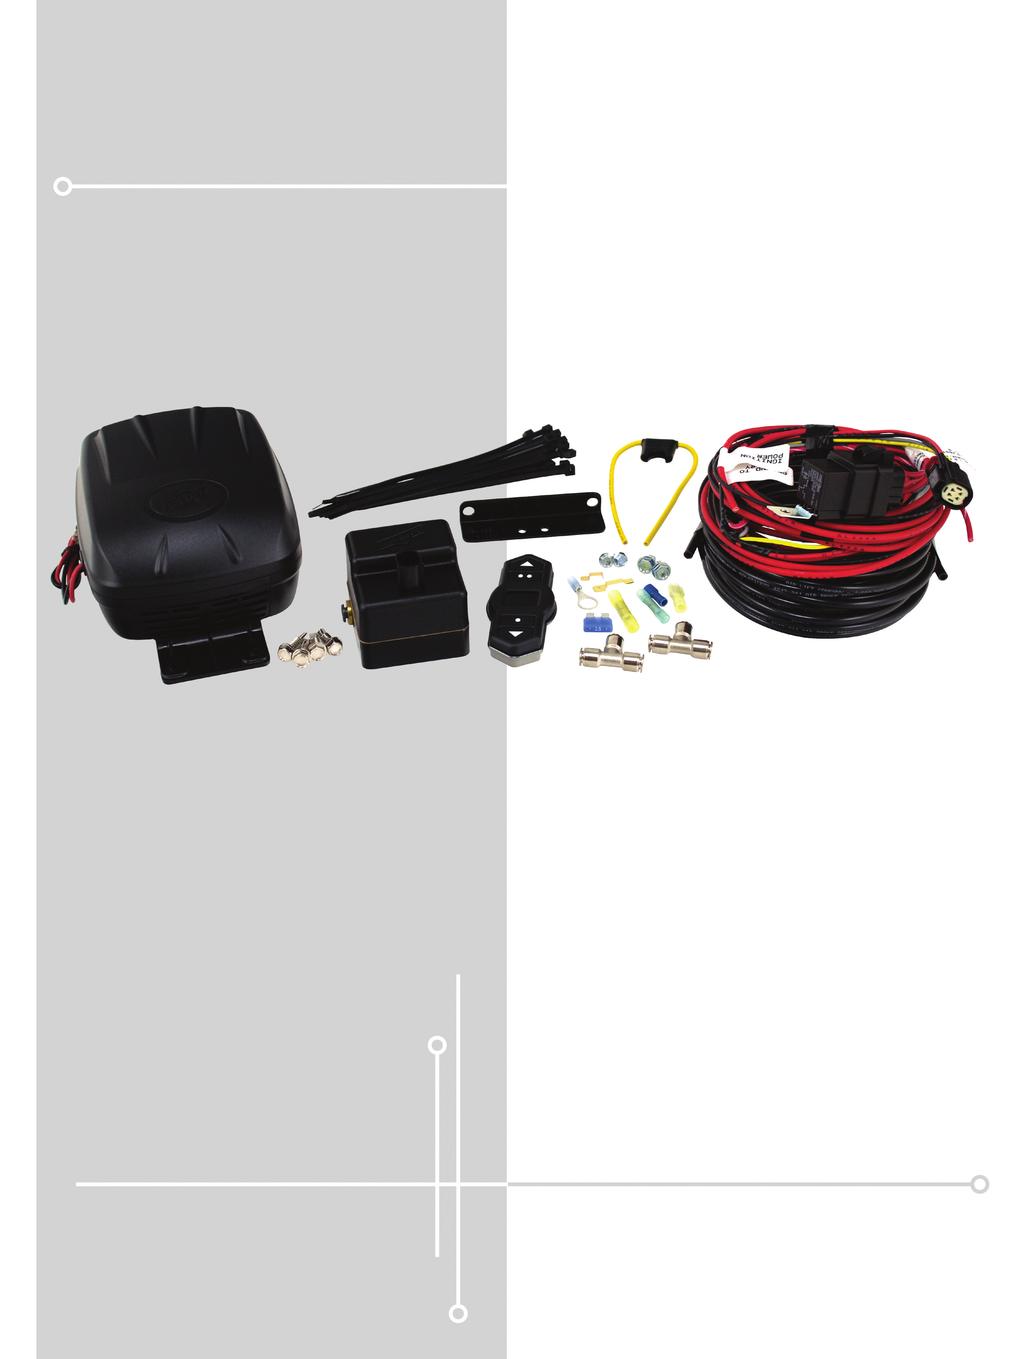 MN-751 (081407) ECR 8016 WirelessONE Kit 25870 Key Fob Activated Compressor System INSTALLATION GUIDE For maximum effectiveness and safety, please